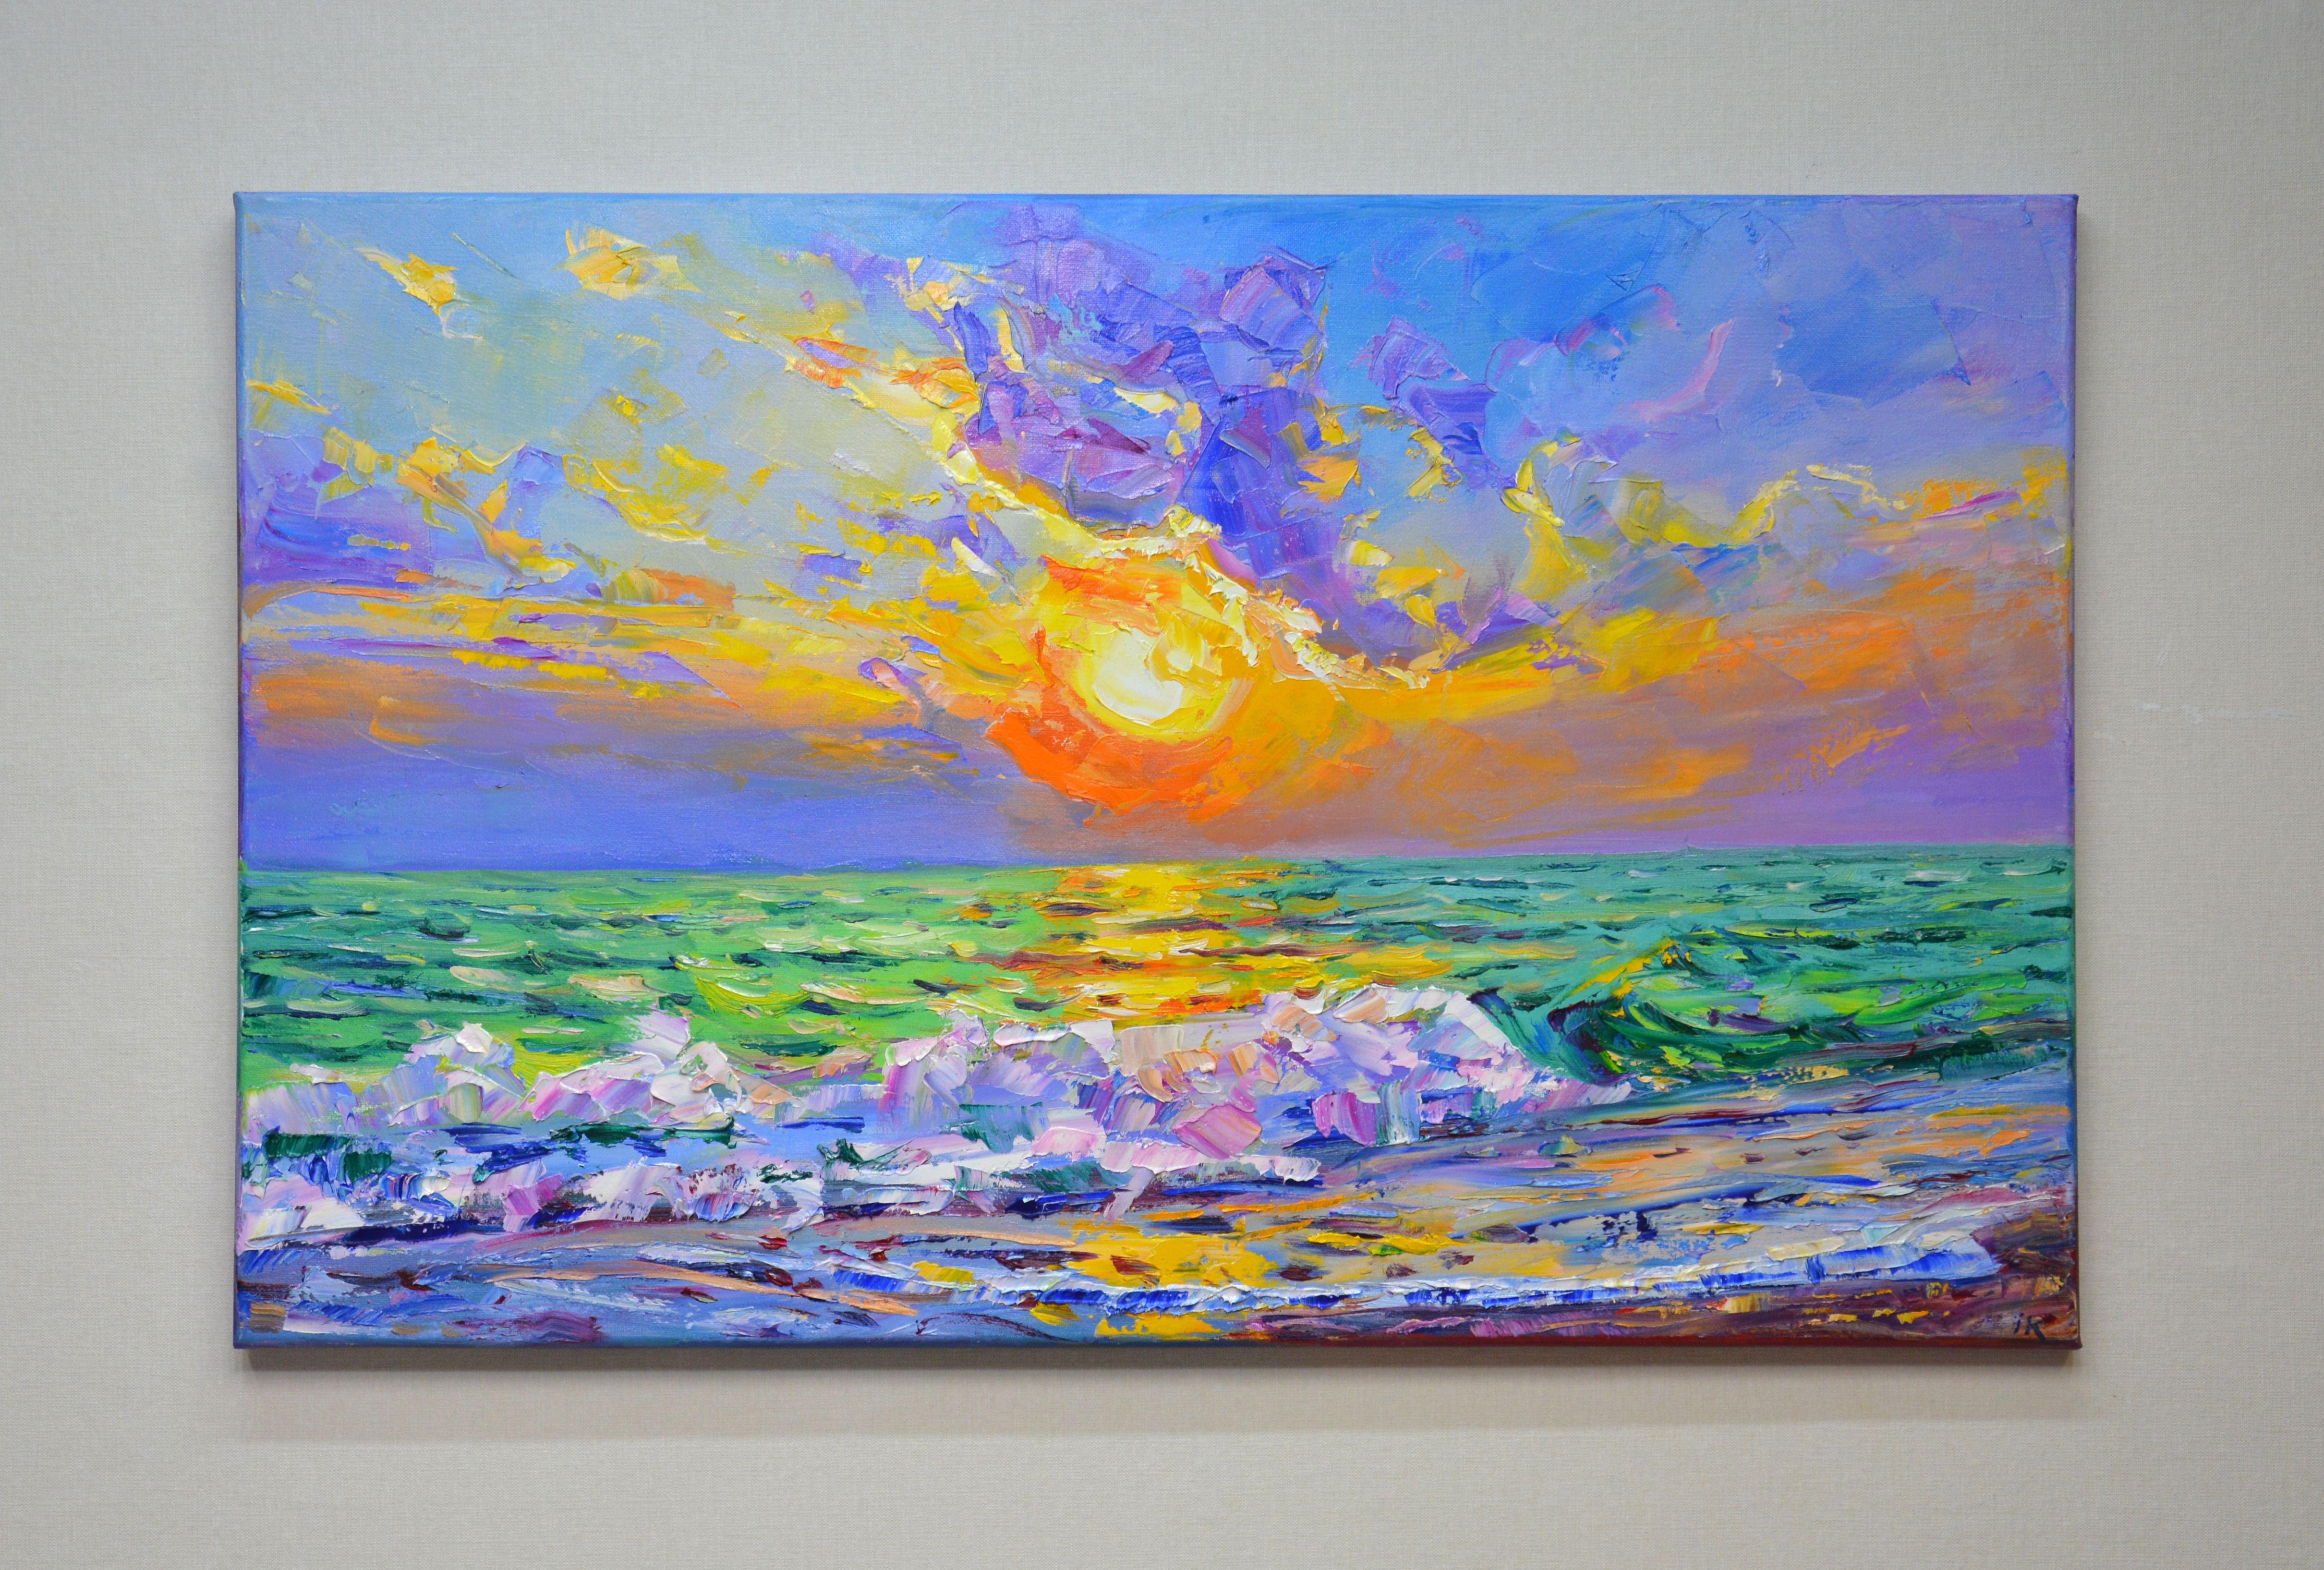 Ocean. Sunset. Water, sky, waves, beach, sand, romance,, impressionism, realism.  Part of an ongoing series of seascapes that capture the luminous qualities of the ocean.  The picture has a good spatial quality, and the colors cause children's